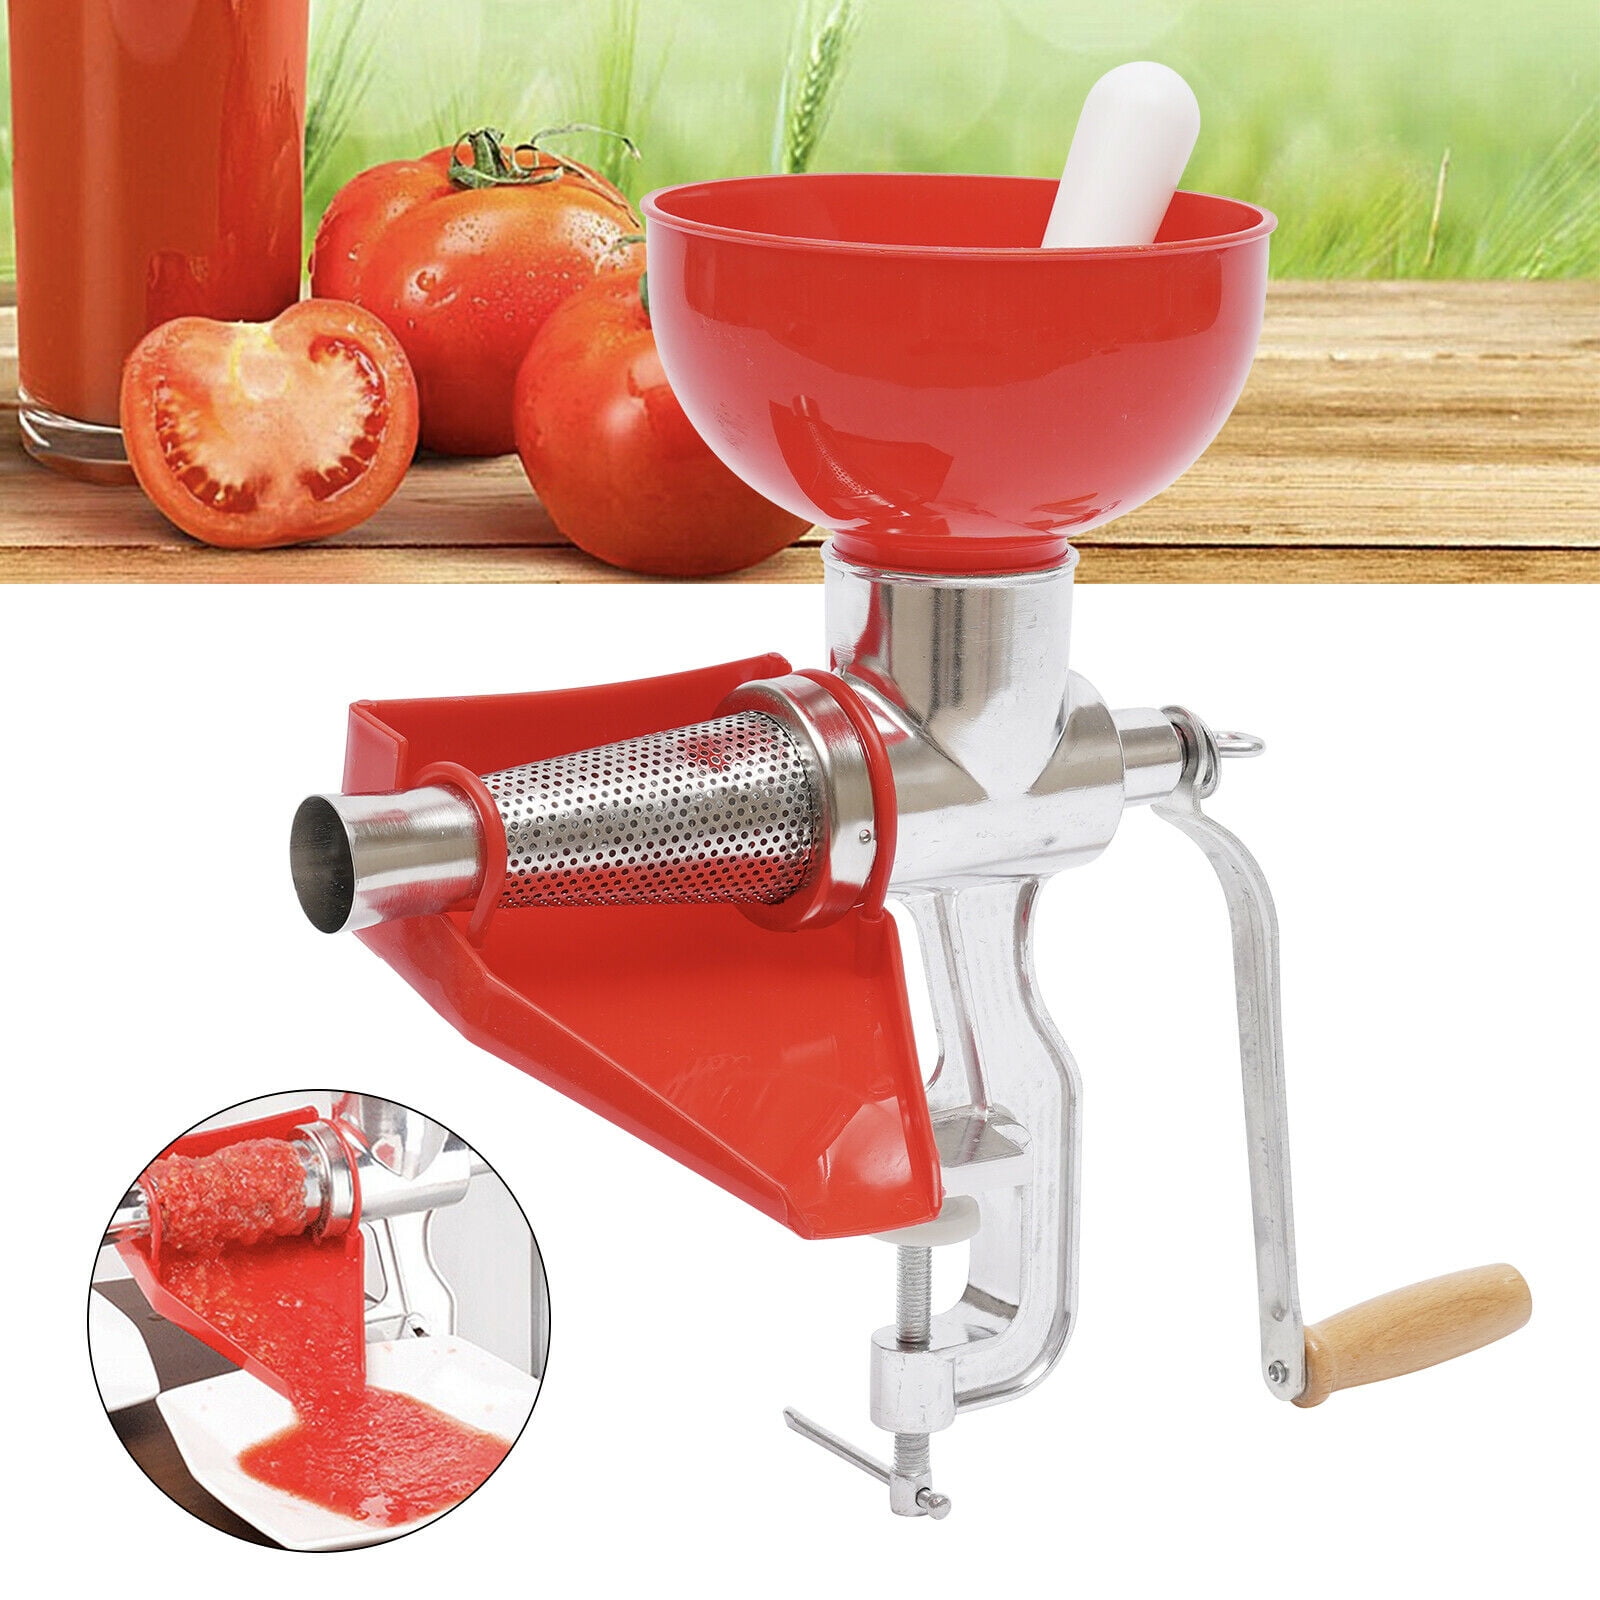 Details about   Manual Tomato Juicer Juicer Juice Extractor Squeeze Hand Crank 